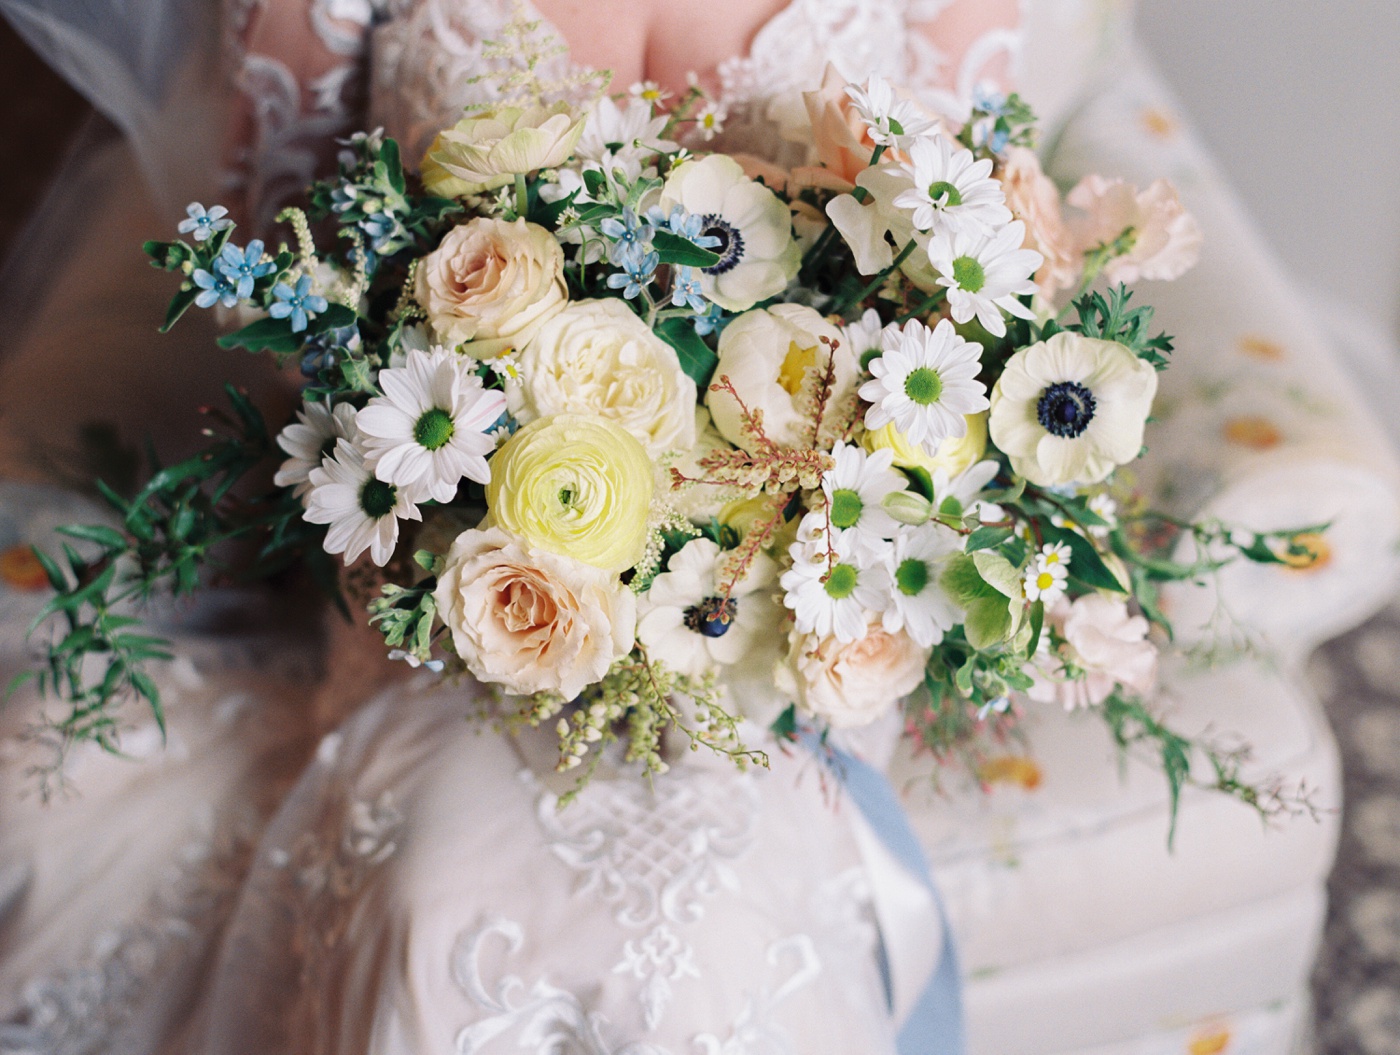 Bridal bouquet filled with anemones, daisies, blush roses, and yellow ranunculus by Emily Herzig Floral Studio